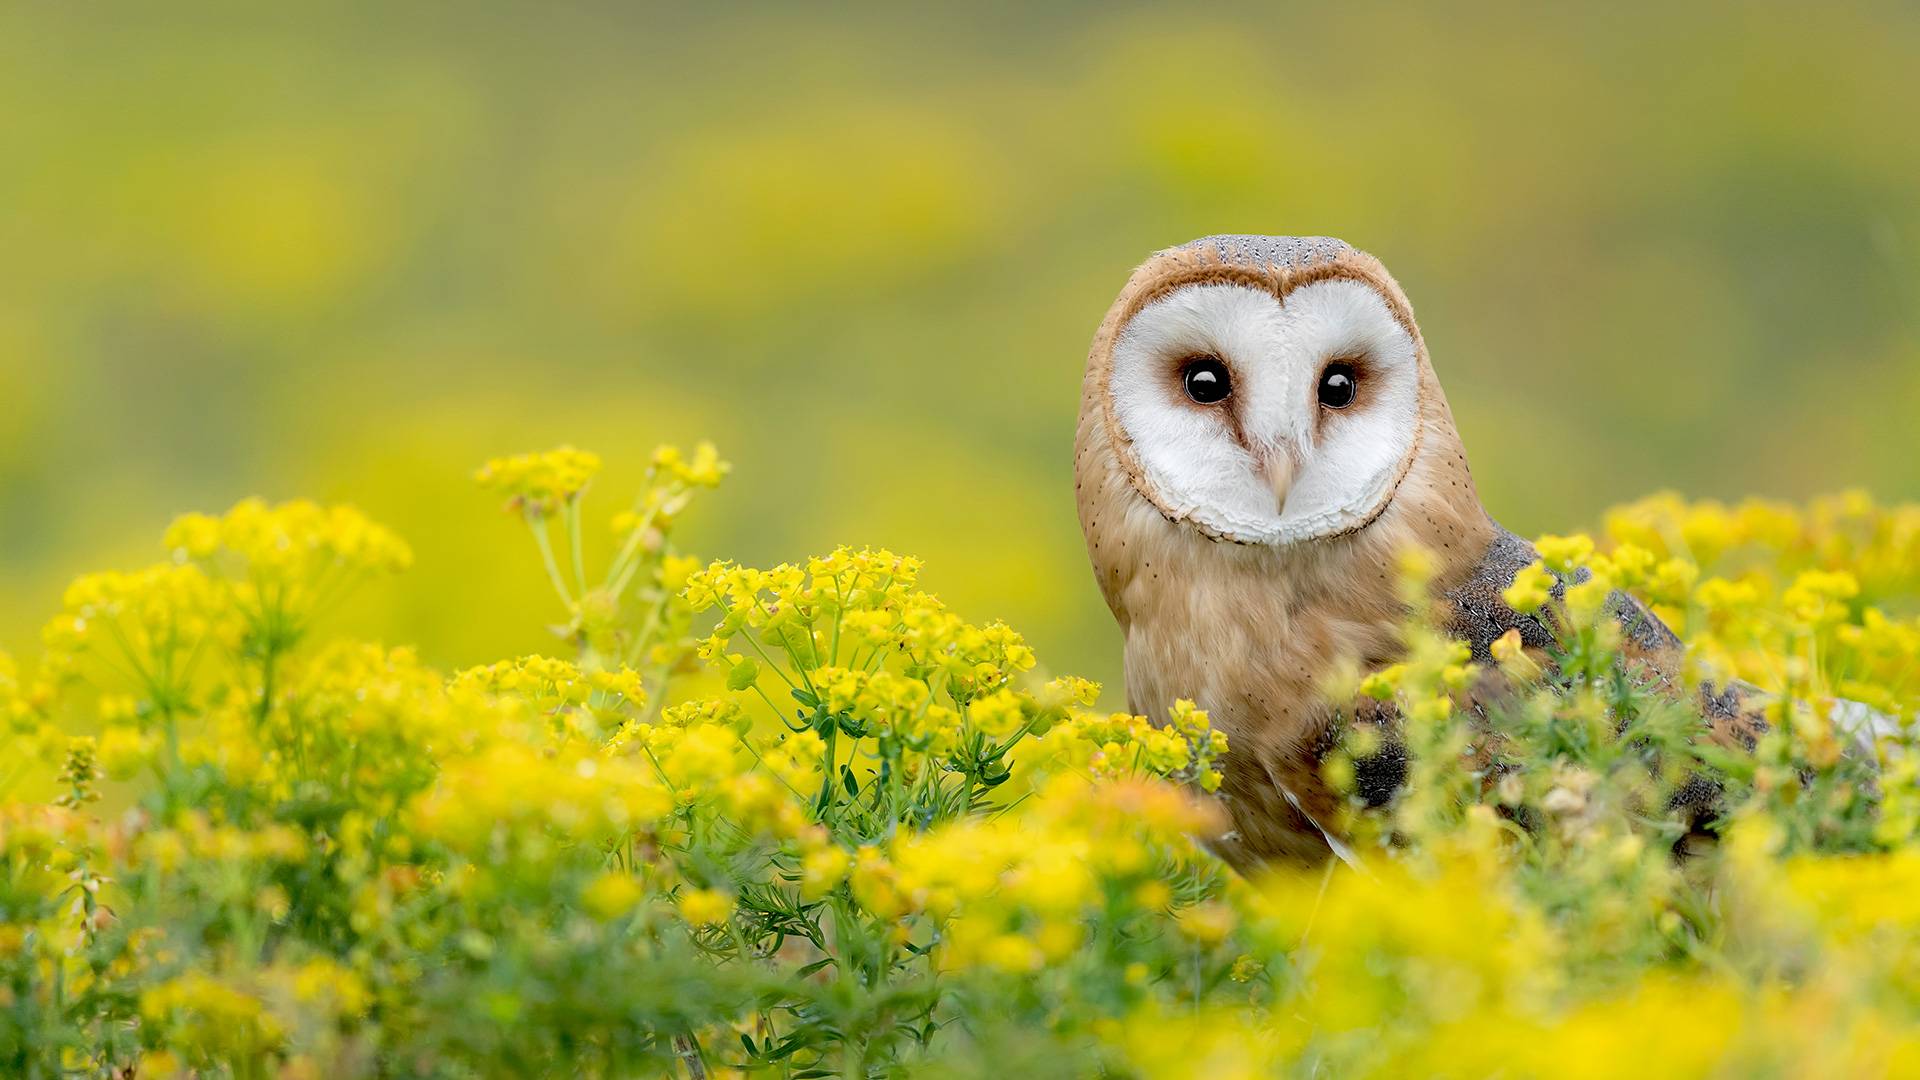 Barn owl in field with yellow plants